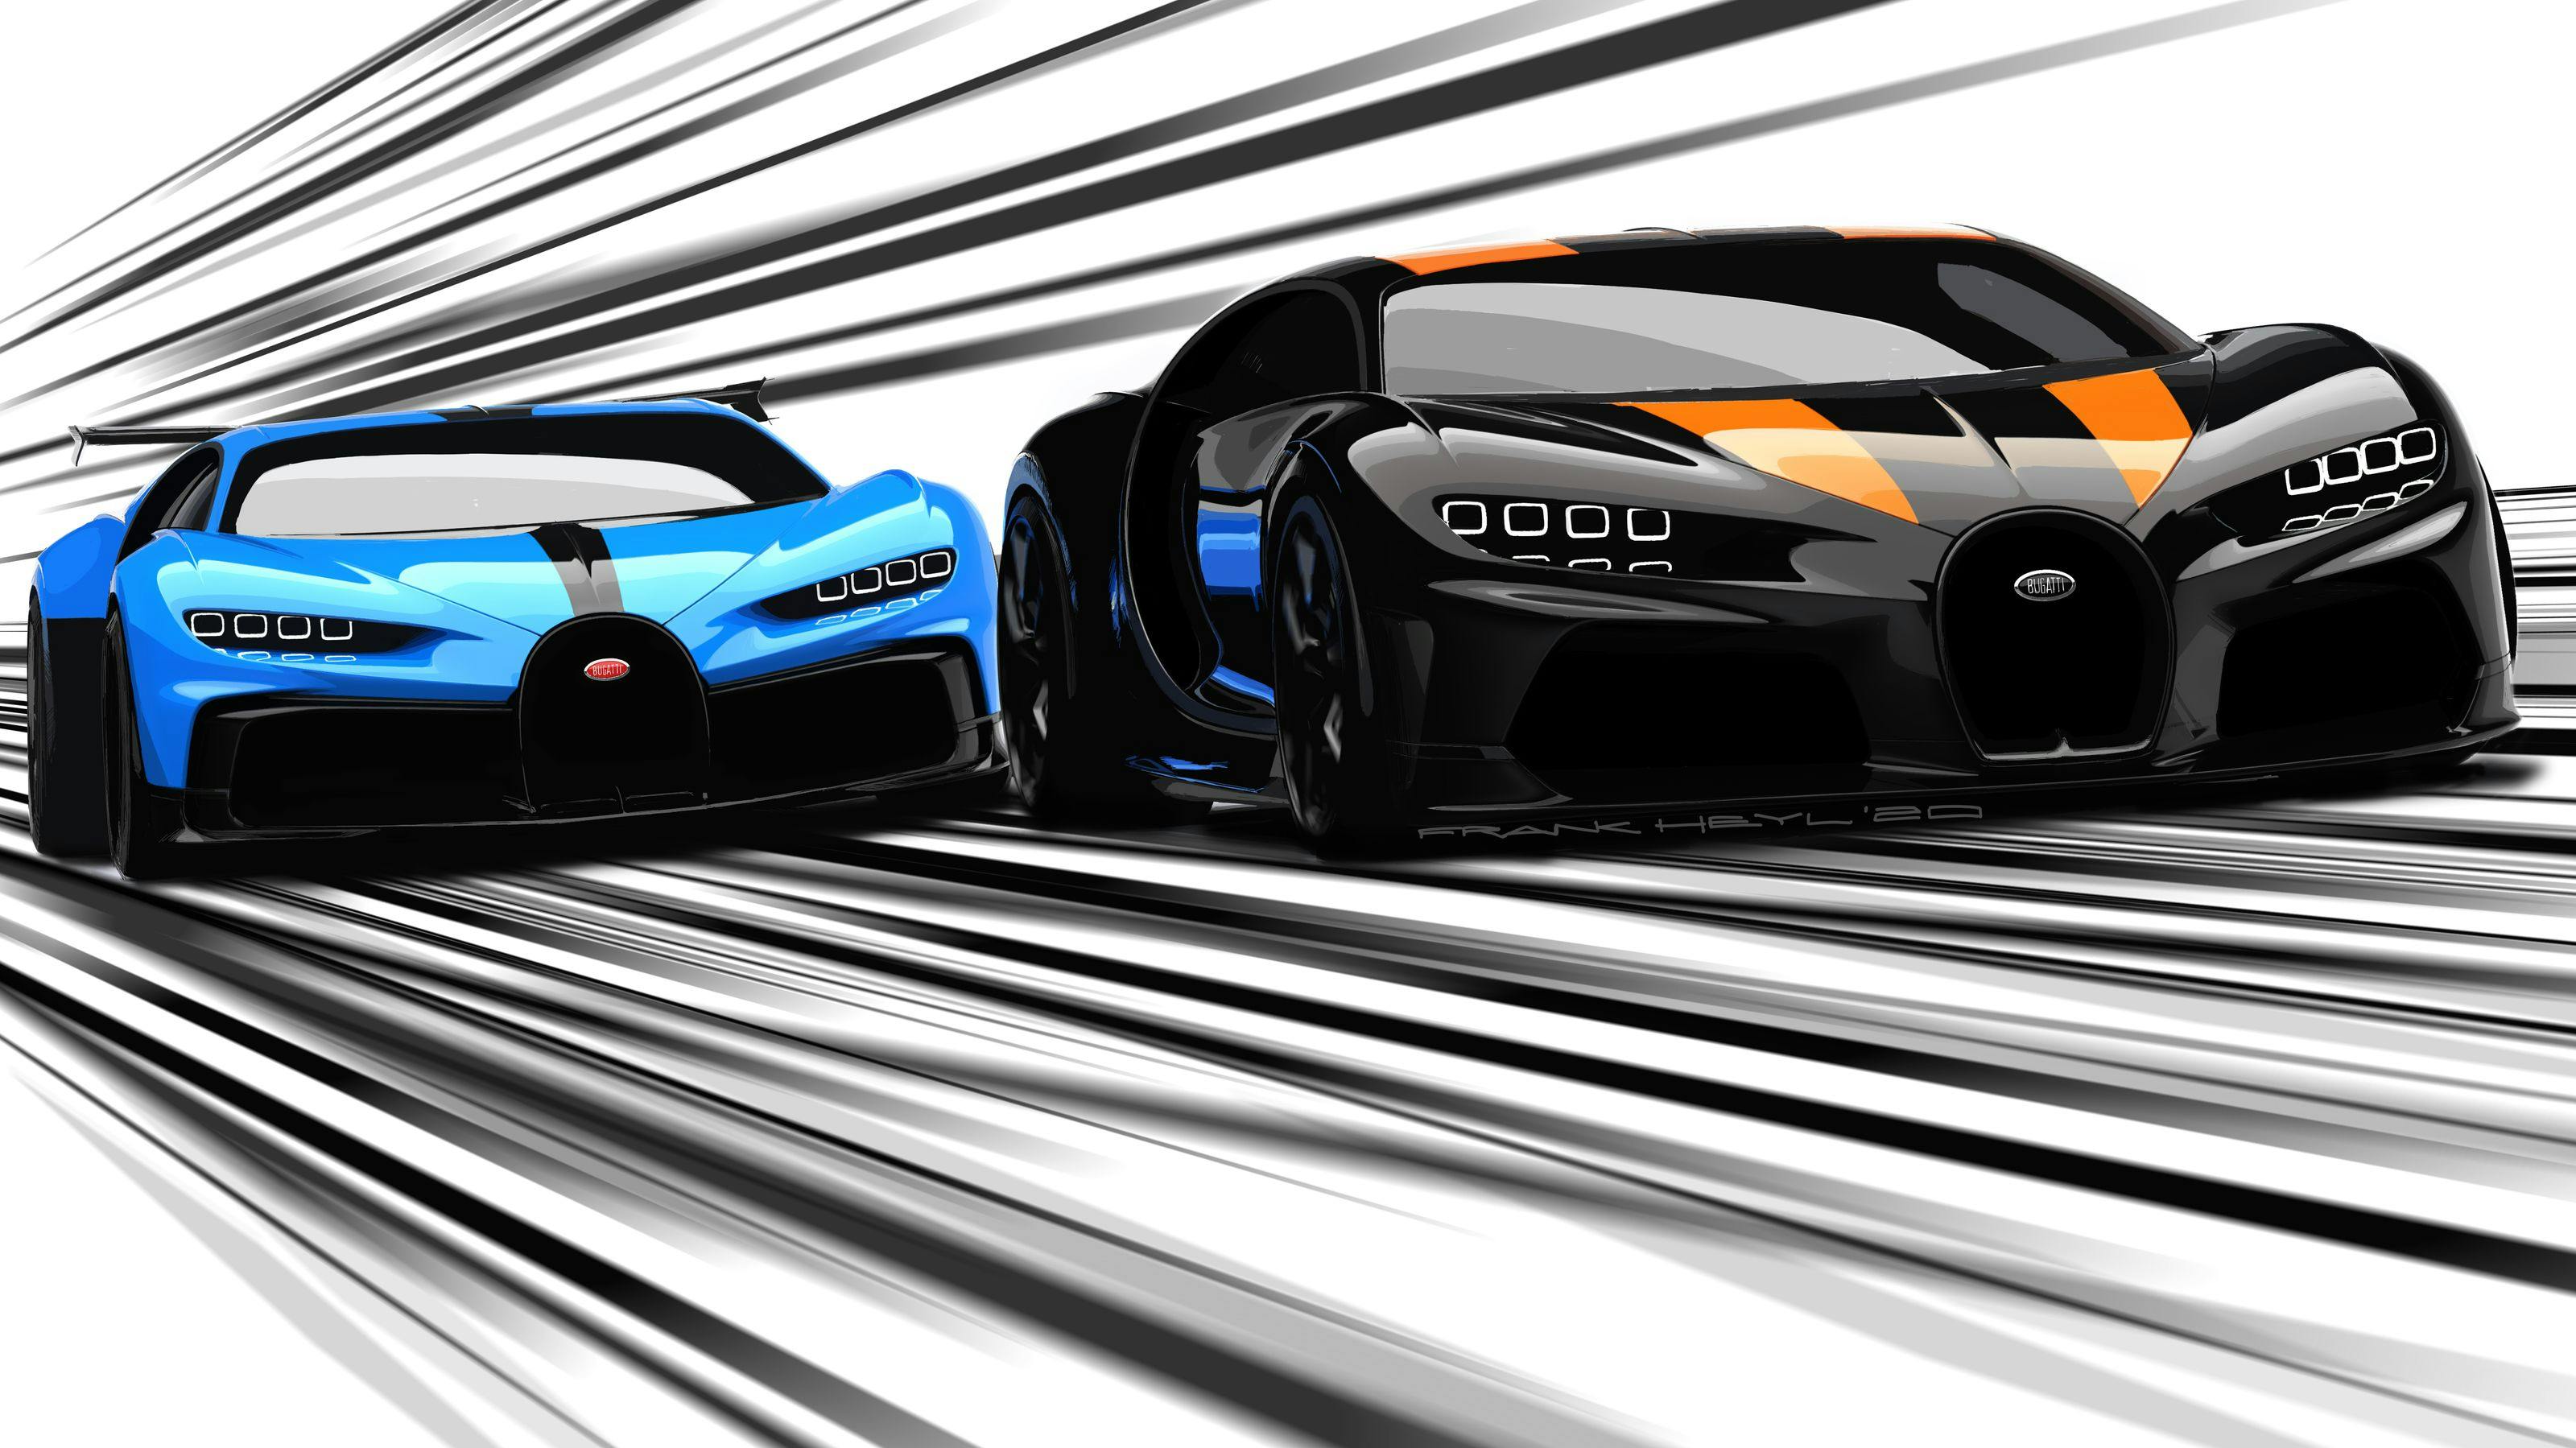 Bugatti's hyper sports cars of extremes from a designer’s point of view